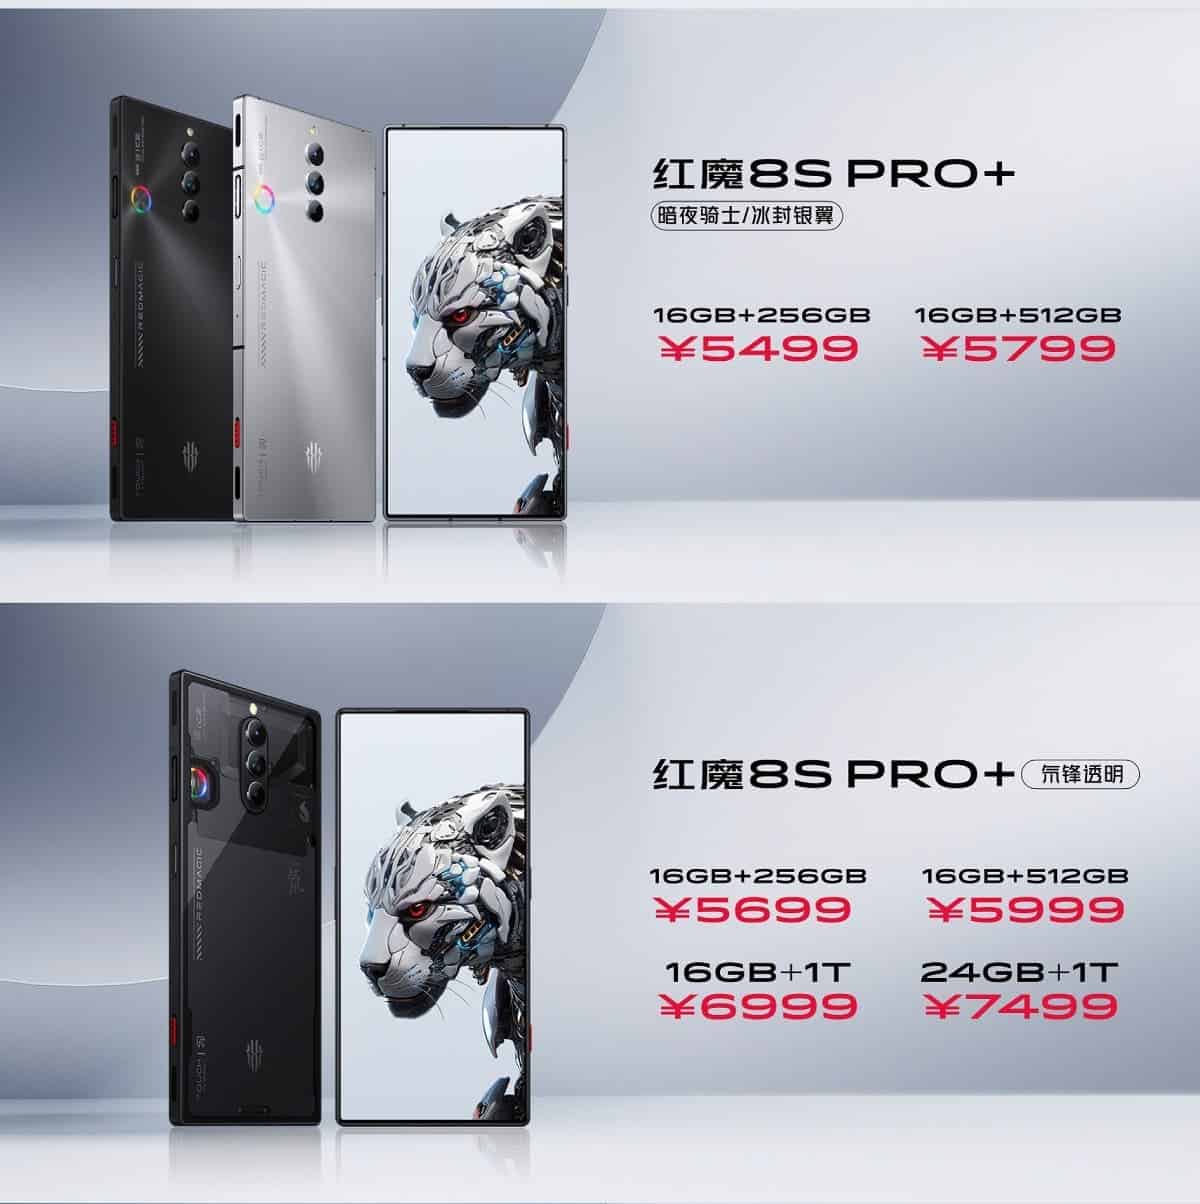 Pricing of Red Magic 8S Pro